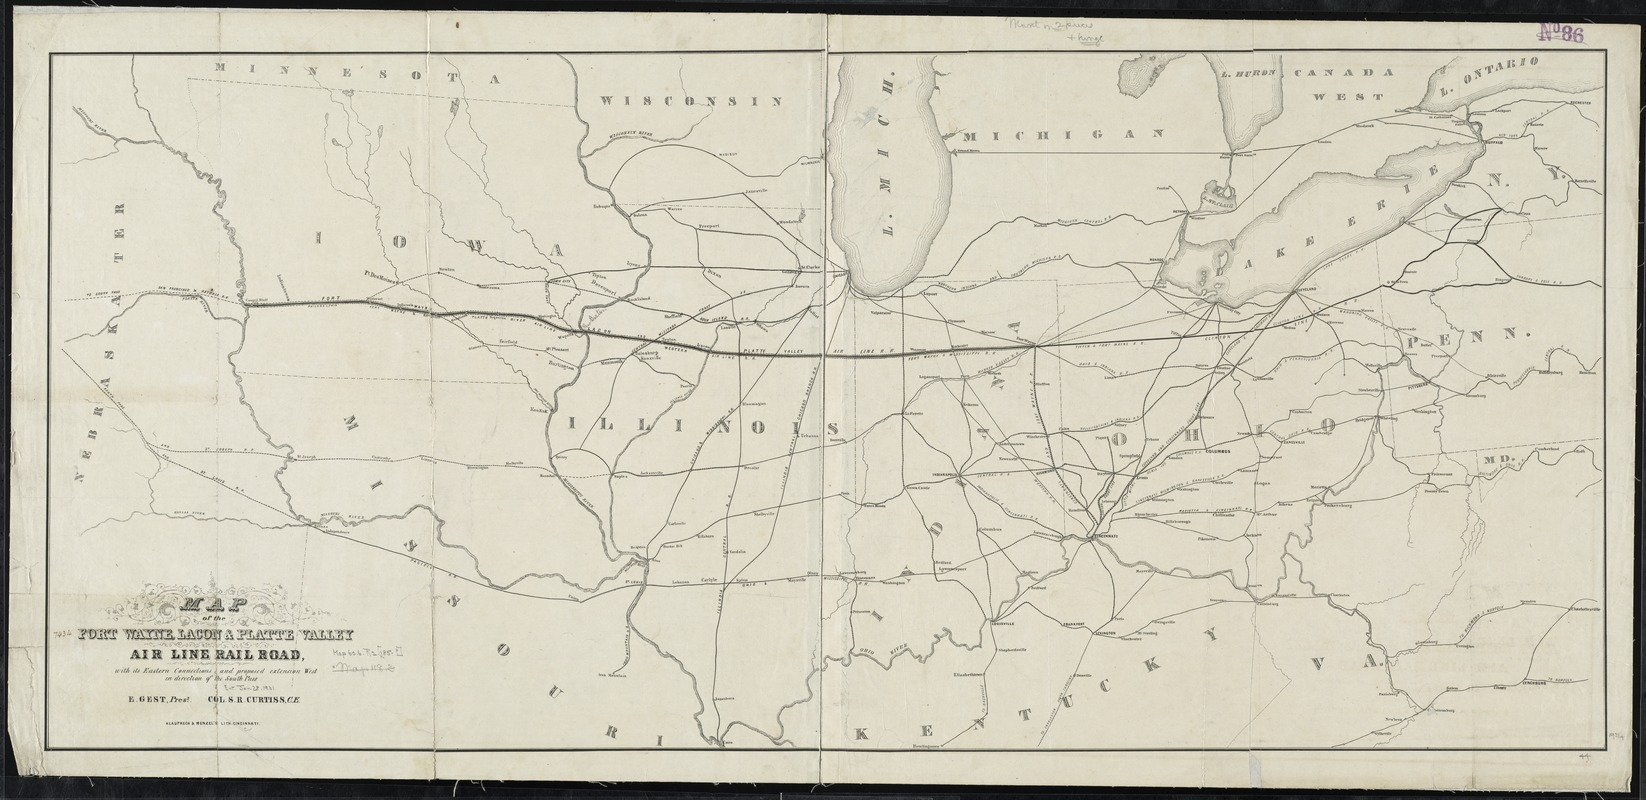 Map of the Fort Wayne, Lacon, & Platte Valley Air Line Railroad, with its eastern connections and proposed extension west in direction of the South Pass